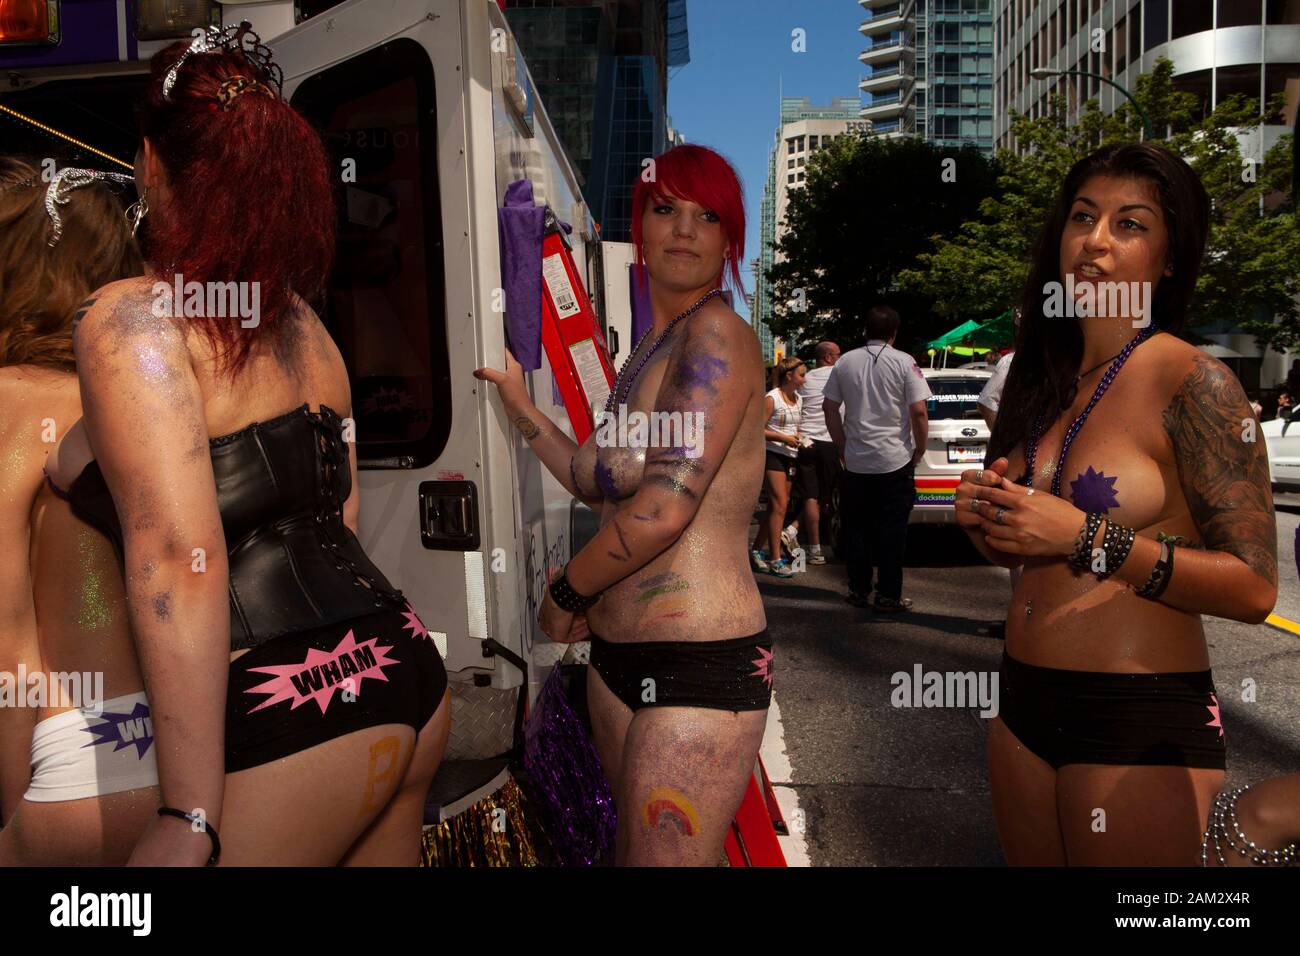 Topless pride parade participants in fancy and fetish costumes, Vancouver Pride Festival 2014, Vancouver, Canada Stock Photo